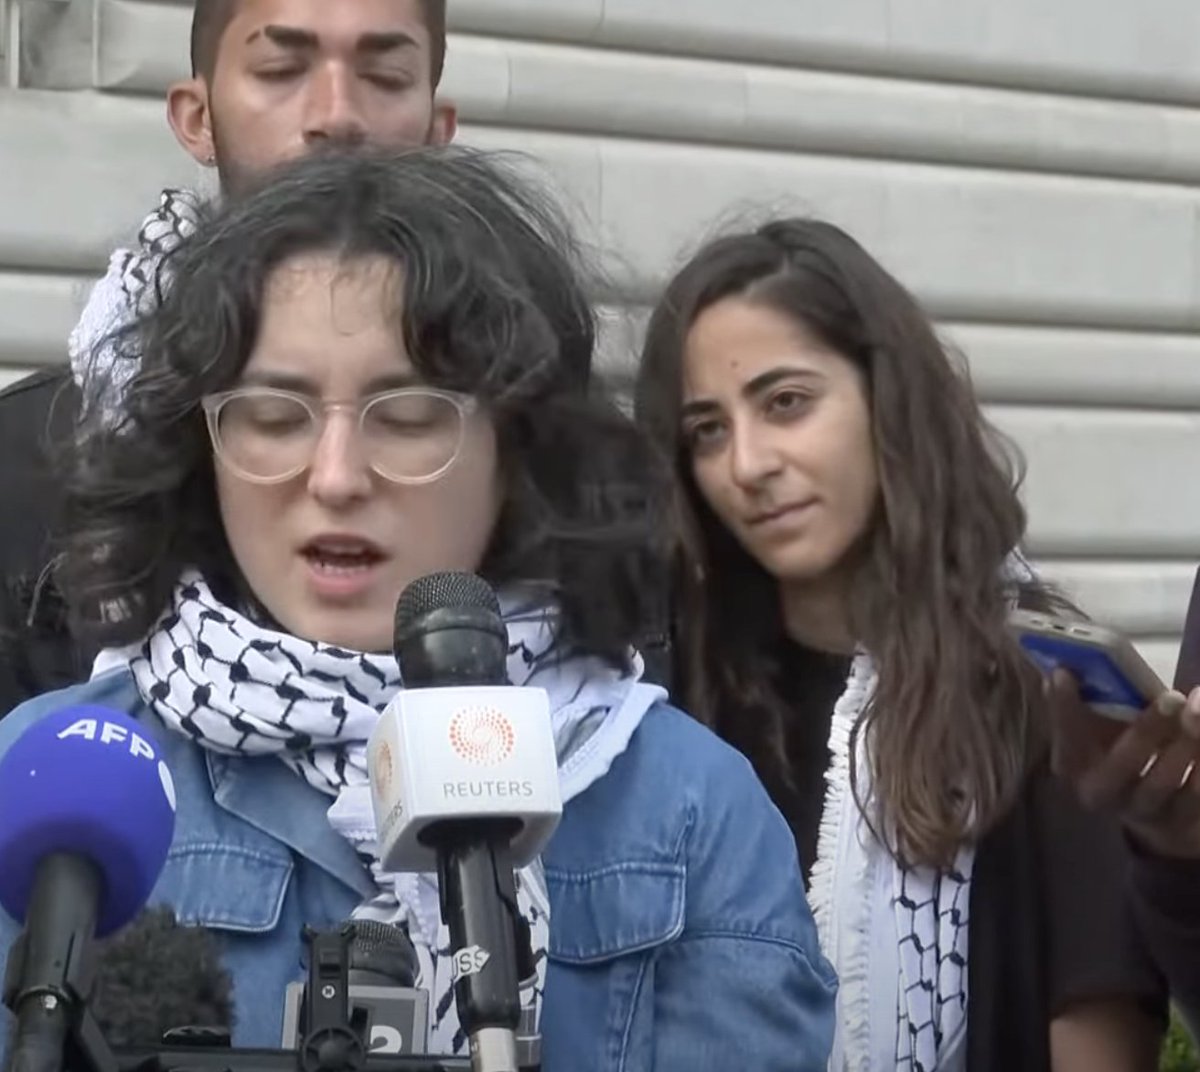 The other woman is named Maryam Alwan. She is a leader with Students for Justice in Palestine (SJP), the Hamas adjacent student group that has organized the nationwide disruptions on college campuses. She has called on students to 'globalize the intifada,' and advocates for the